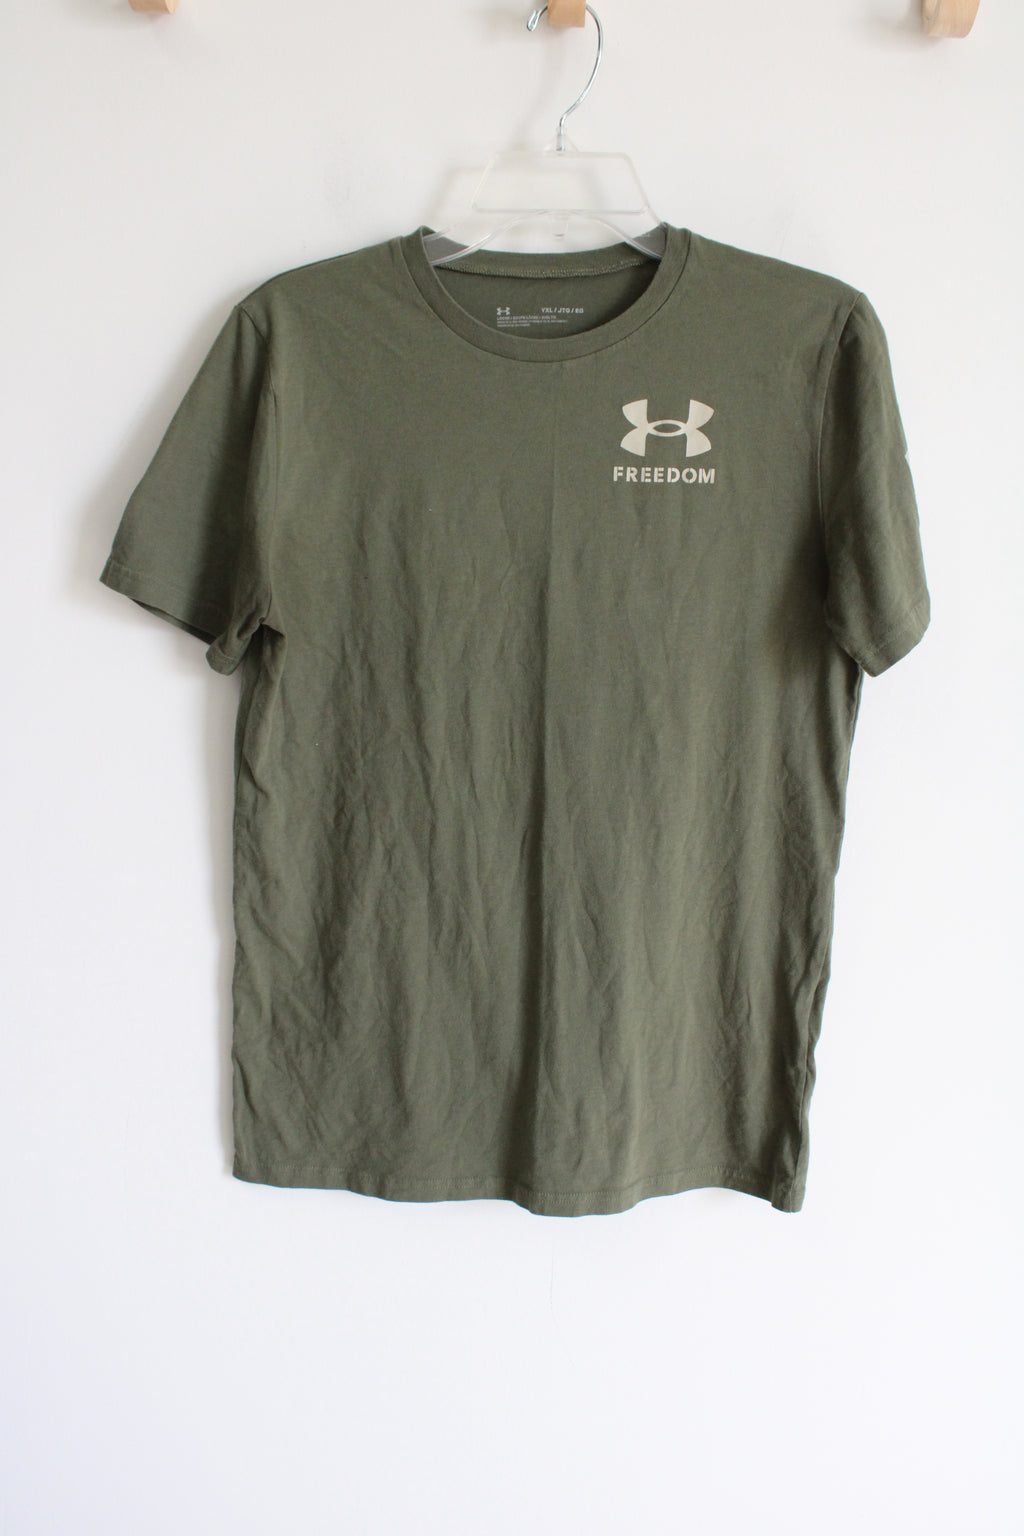 Under Armour Loose Fit Freedom Olive Green Tee | Youth XL (16/18)